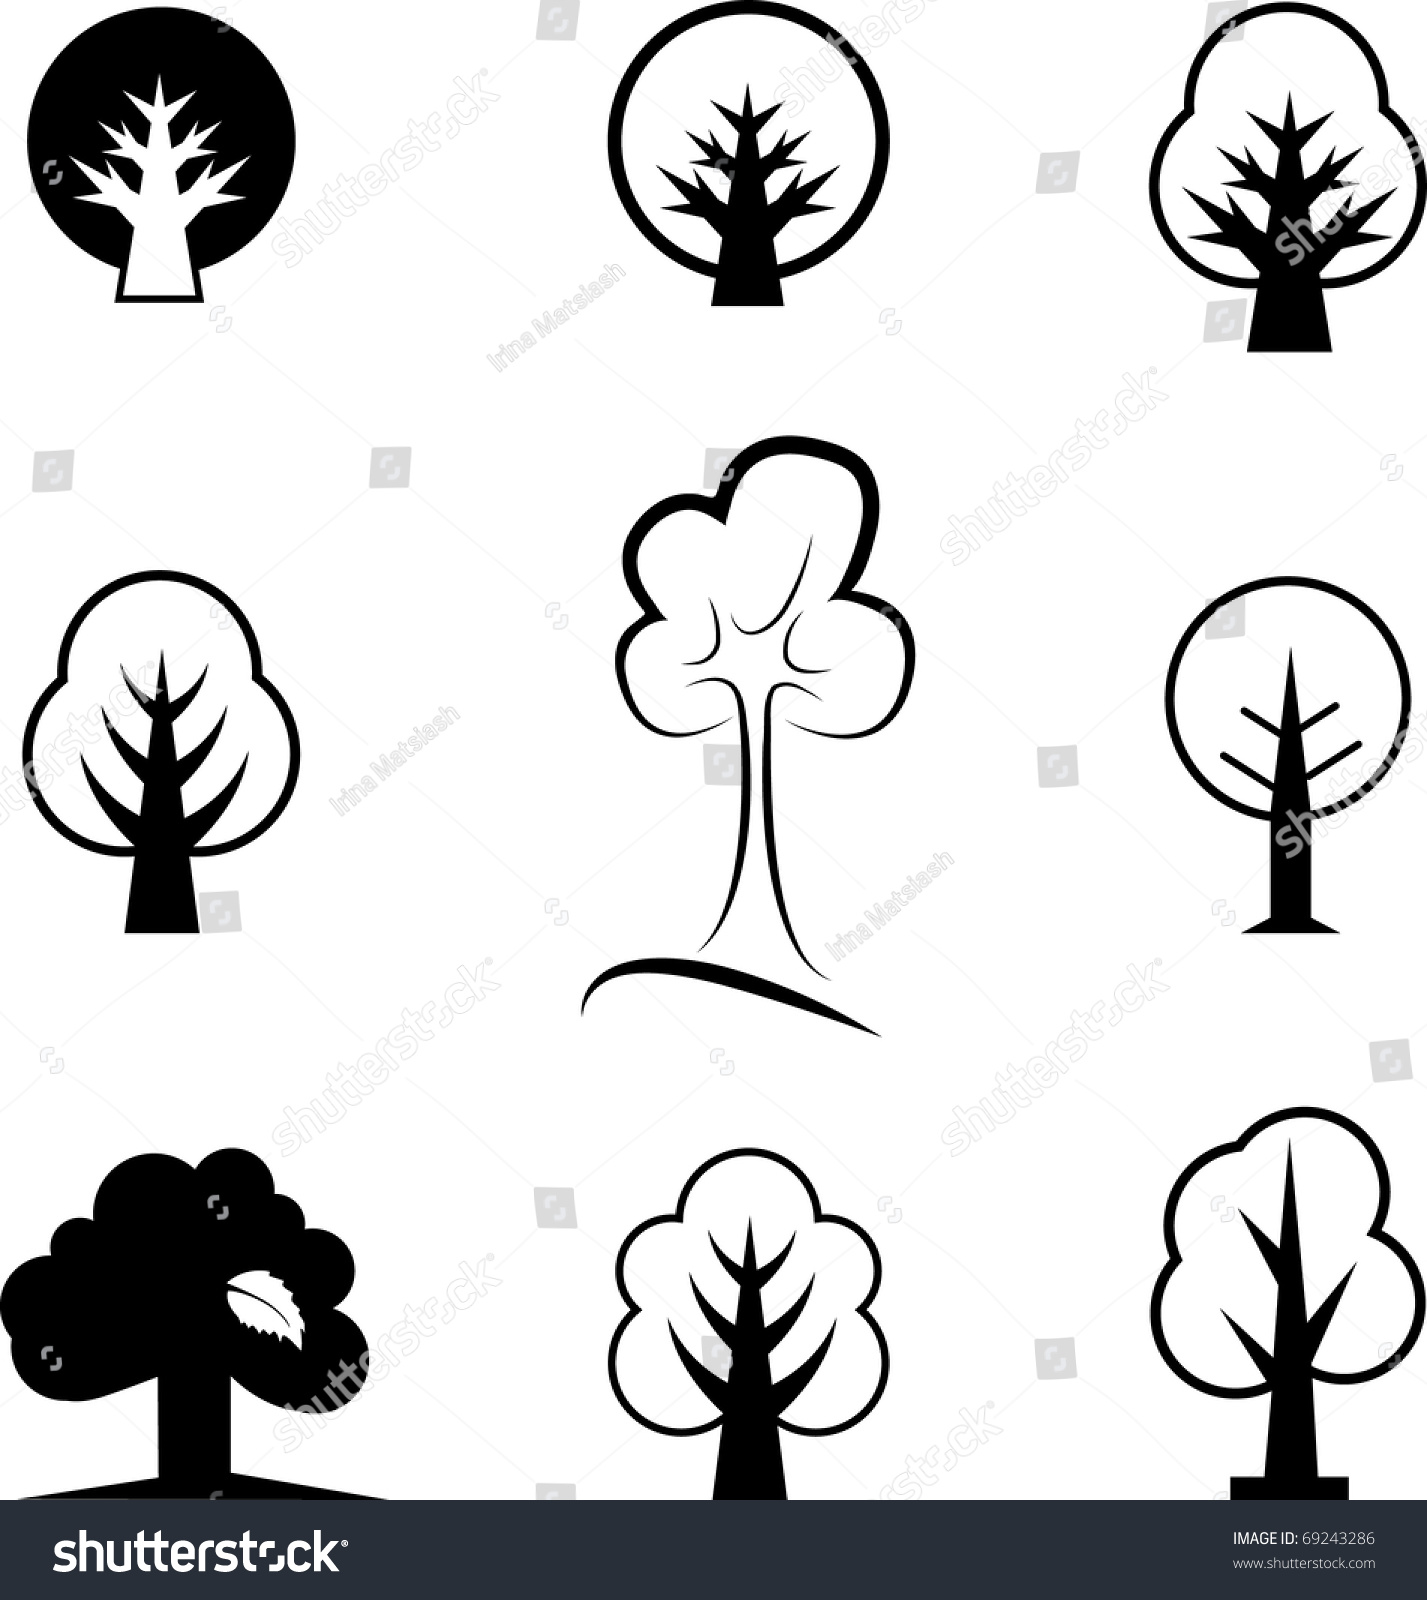 Icons Of Trees Stock Vector Illustration 69243286 : Shutterstock